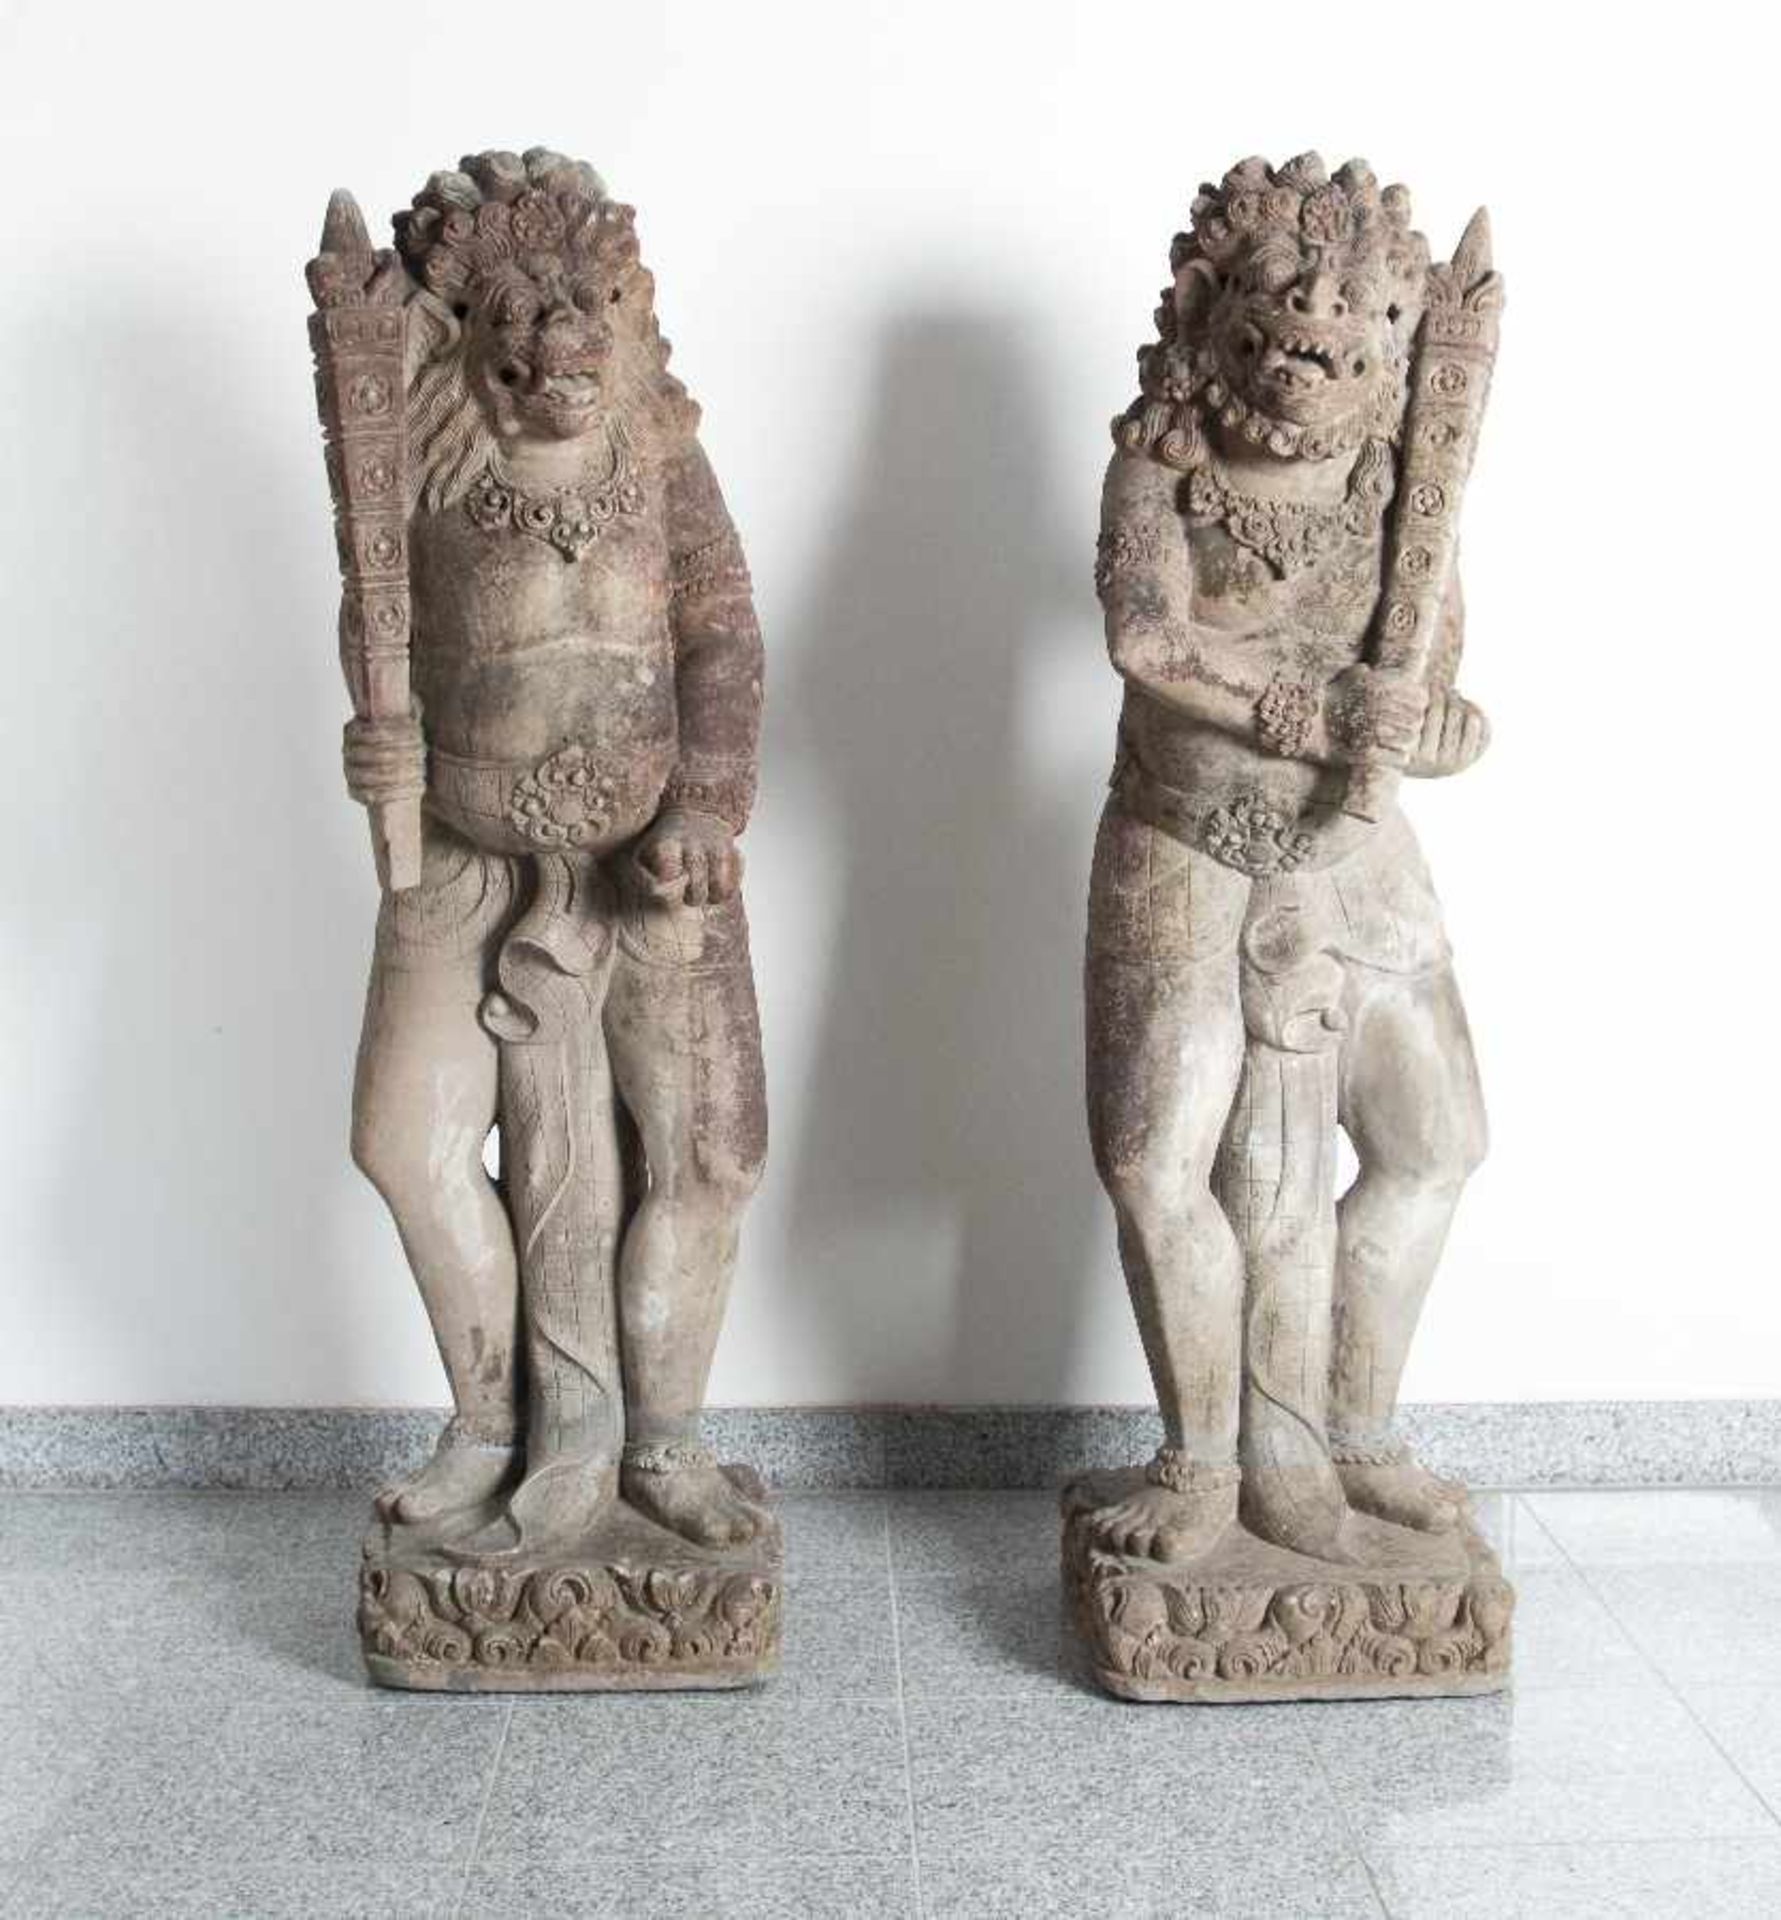 Bali / IndonesiaA pair of demons as guardian figuresCast stone, finished by hand; H each 124 cm; old